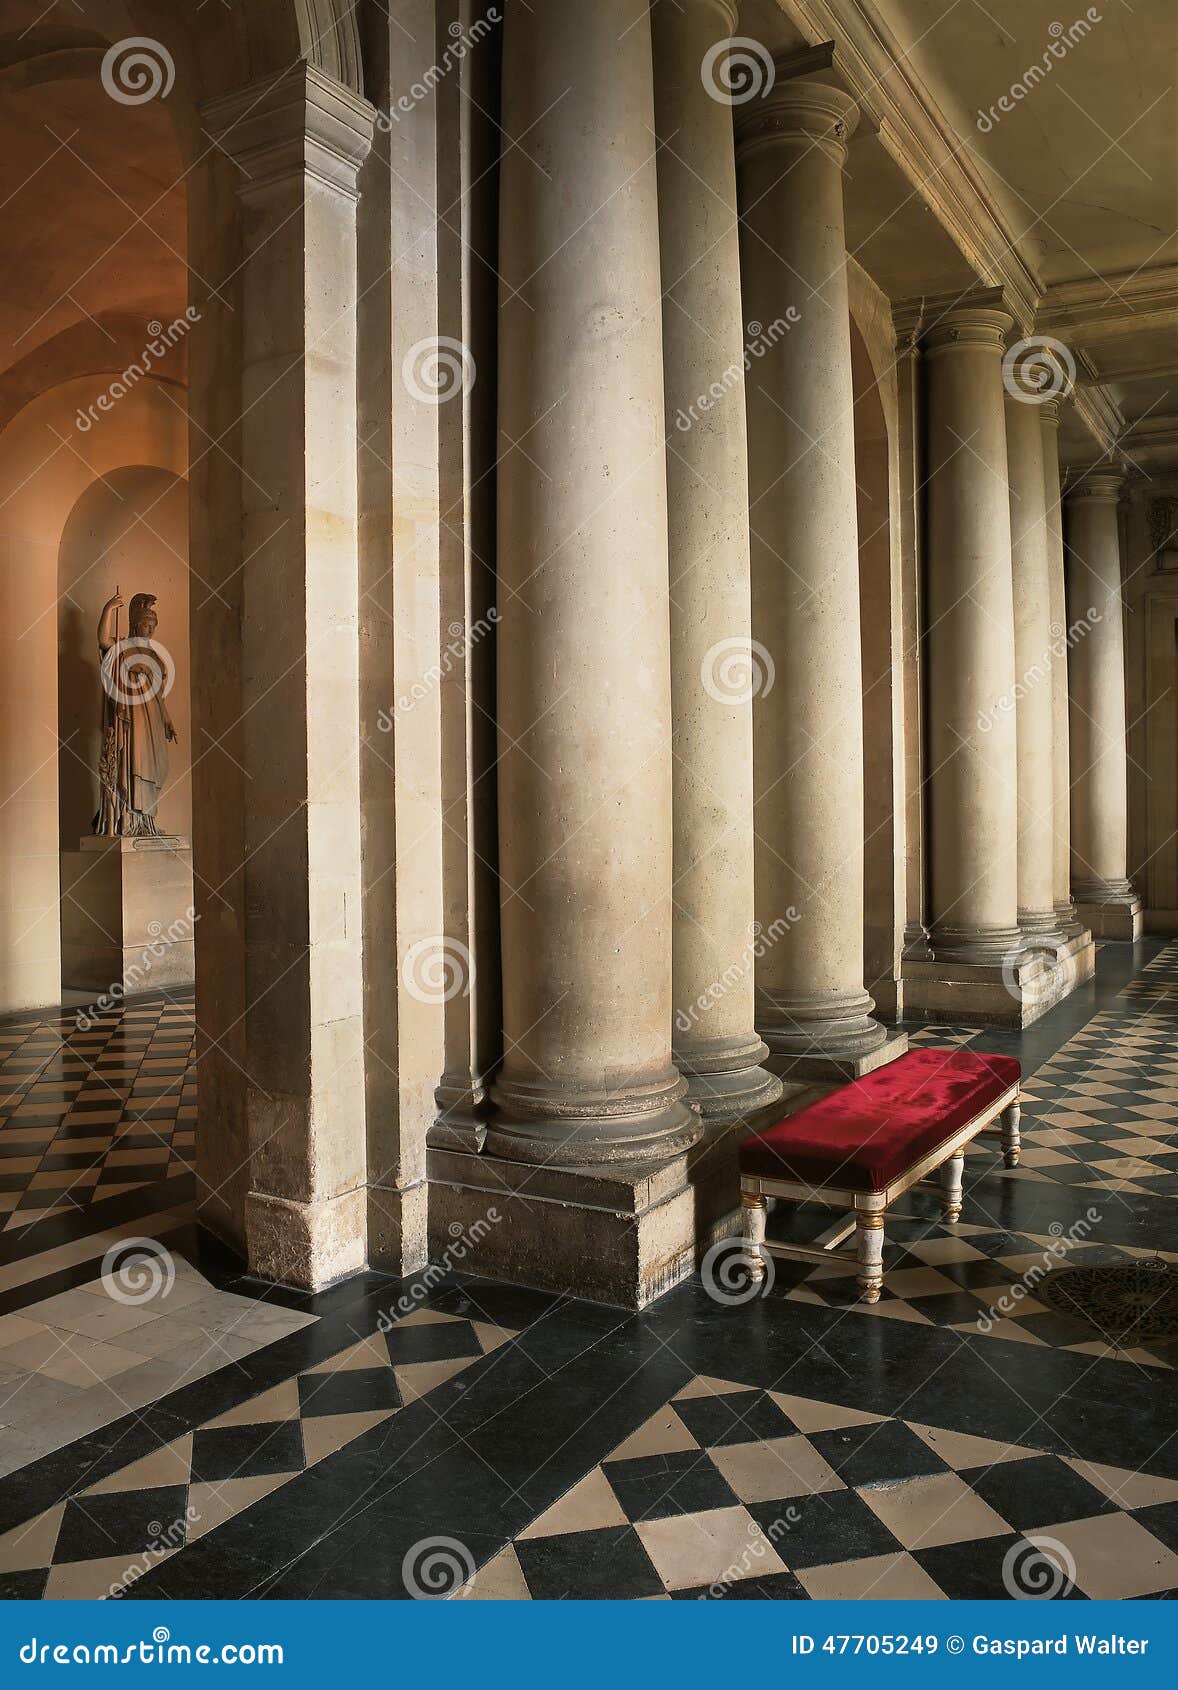 Columns and Marble Floor at Versailles Palace Editorial Stock Image - Image  of french, majestic: 47705249